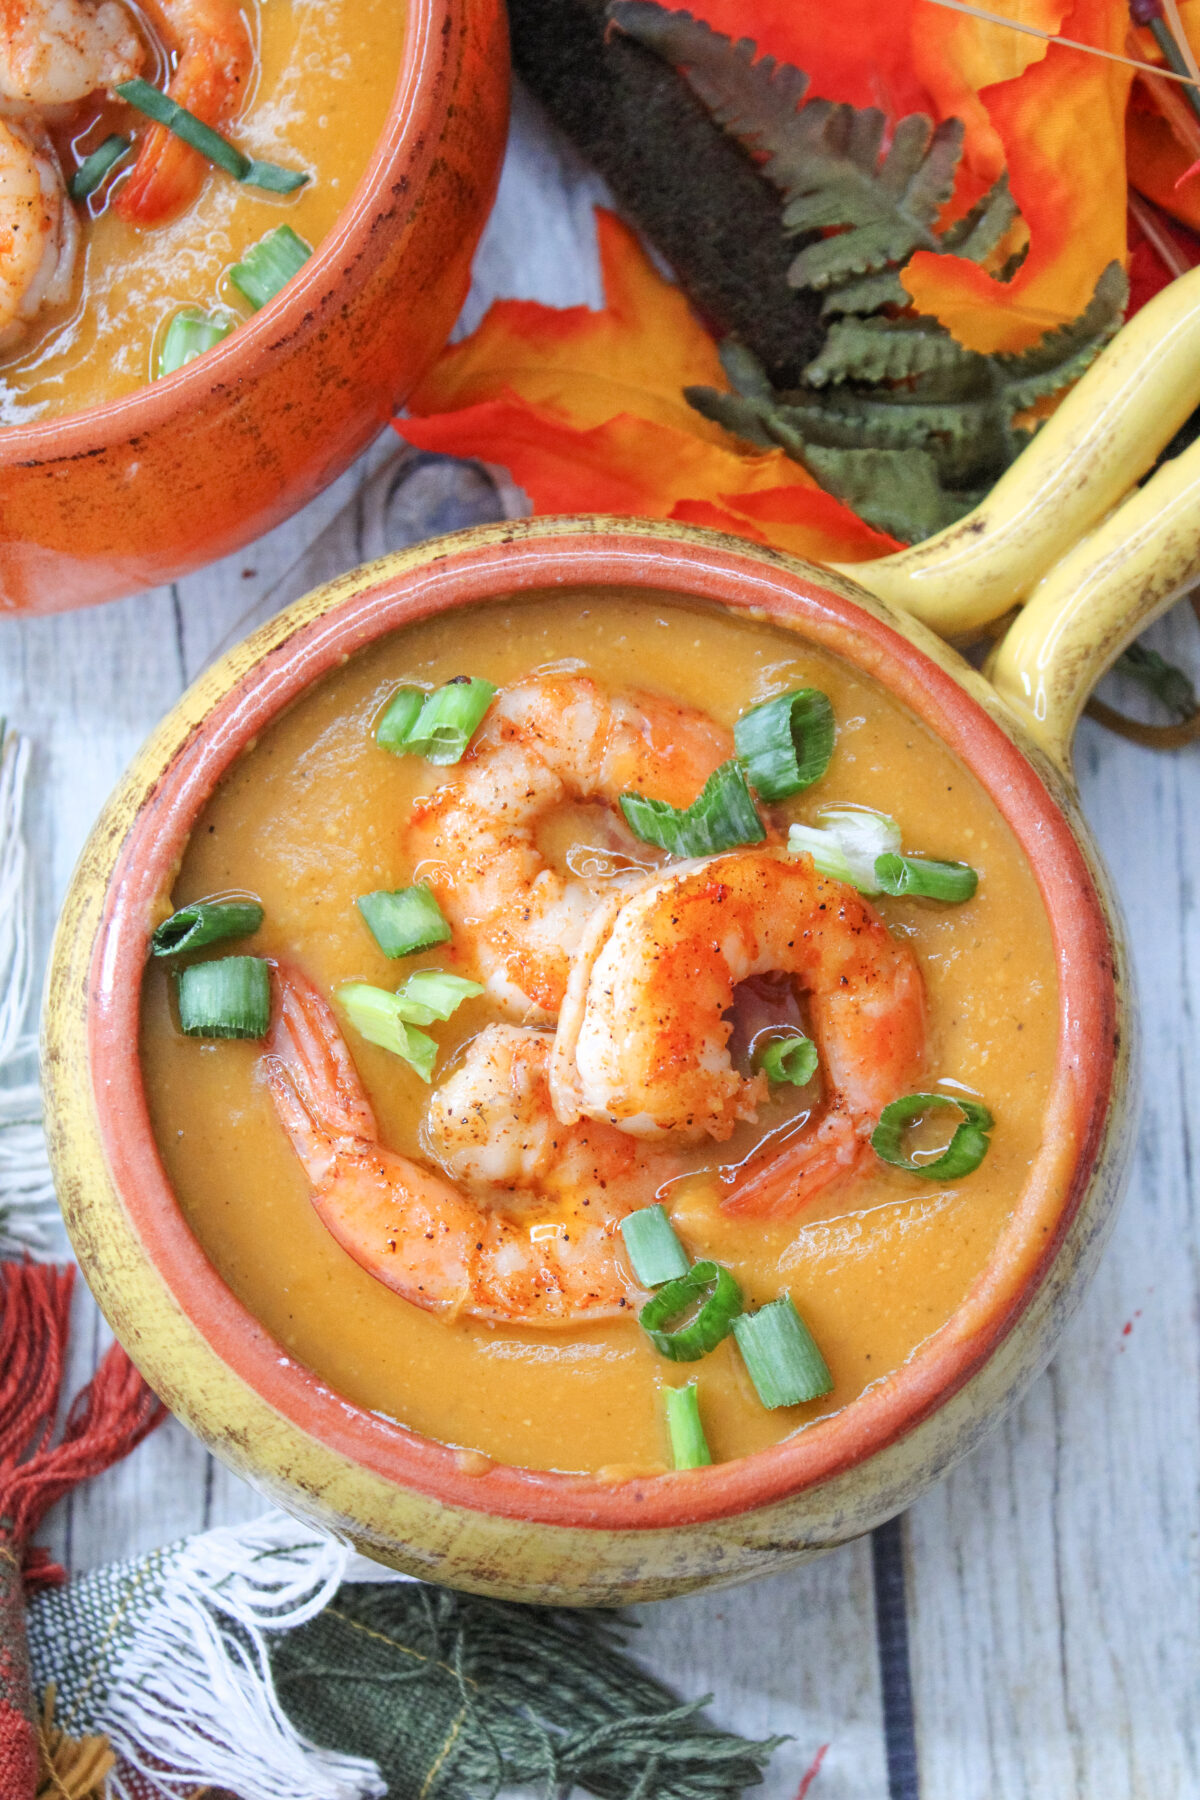 This tasty Cajun sweet potato soup recipe is a bowl of comforting goodness! It's the perfect mix of sweet and spicy that will hit the spot.